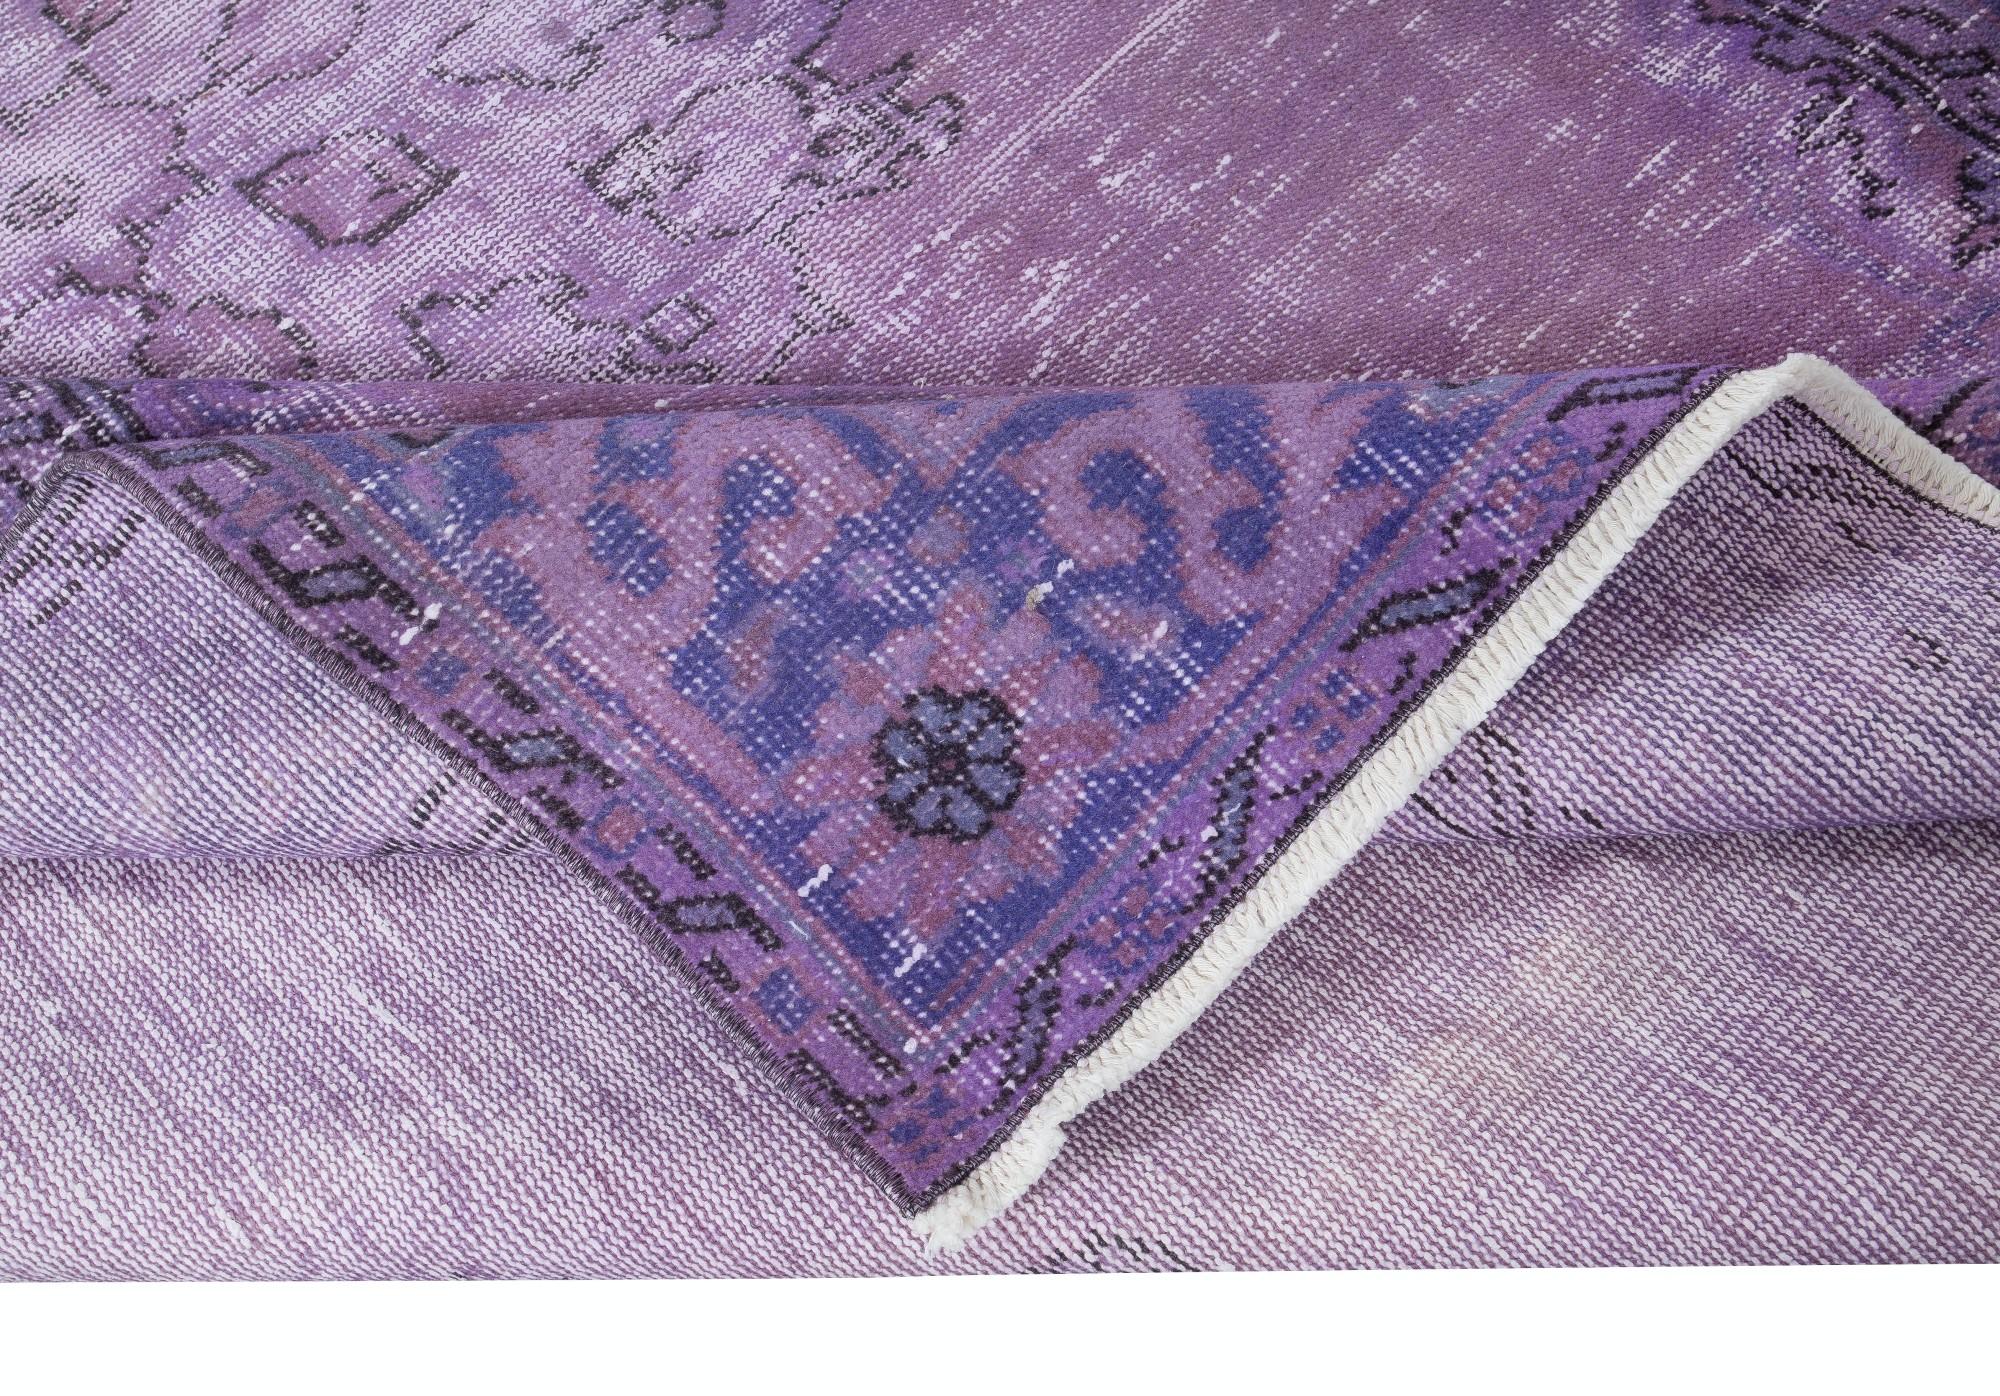 5.8x9 Ft Hand Knotted Turkish Wool Area Rug, Lavender & Orchid Purple Colors In Good Condition For Sale In Philadelphia, PA